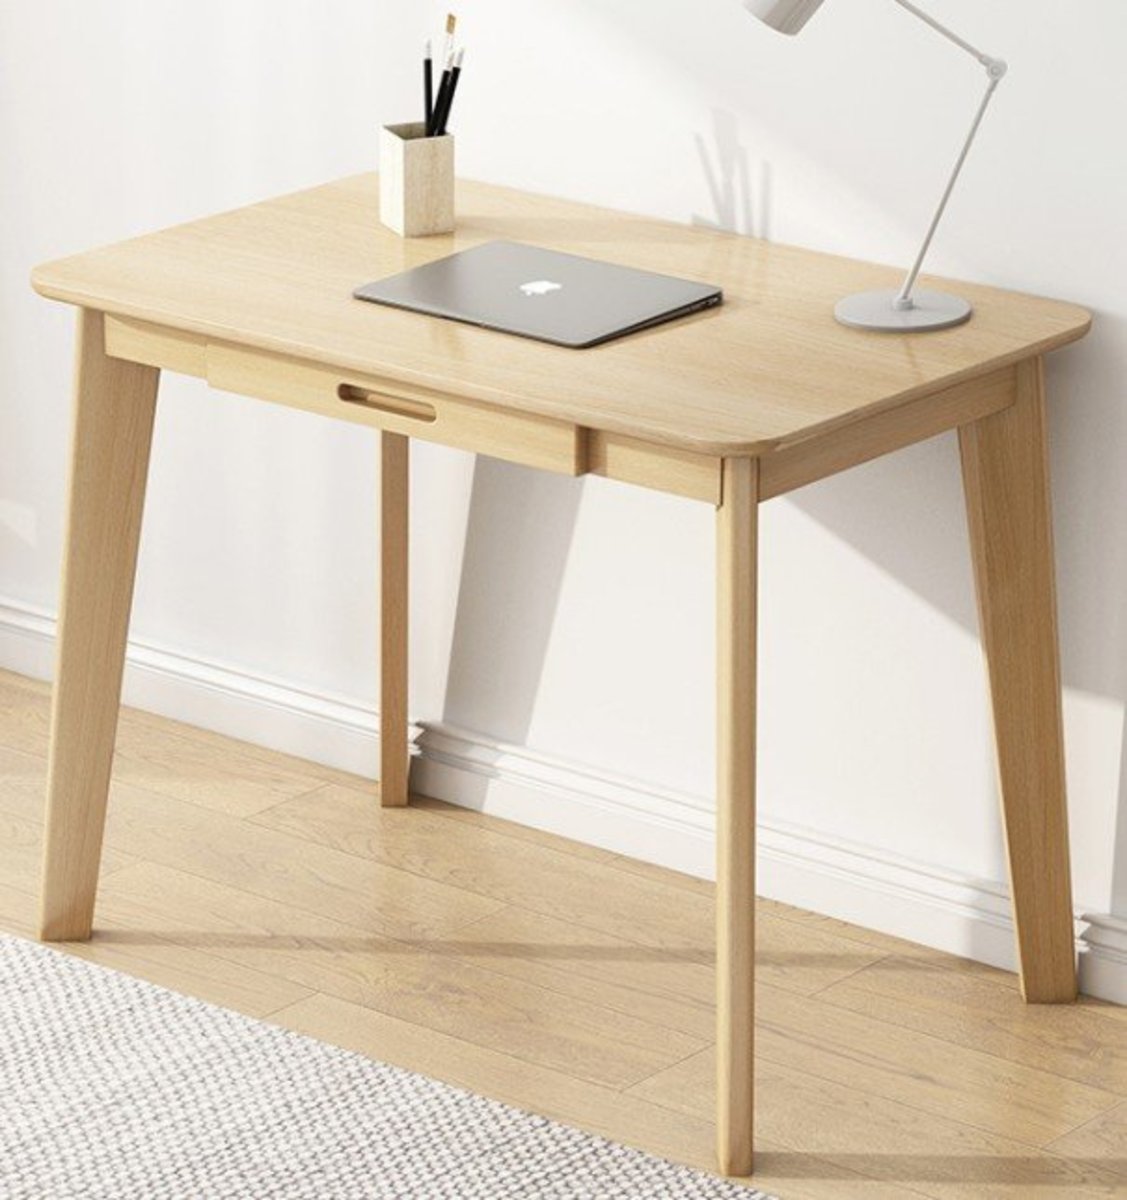 Nordic style wooden desk with drawer